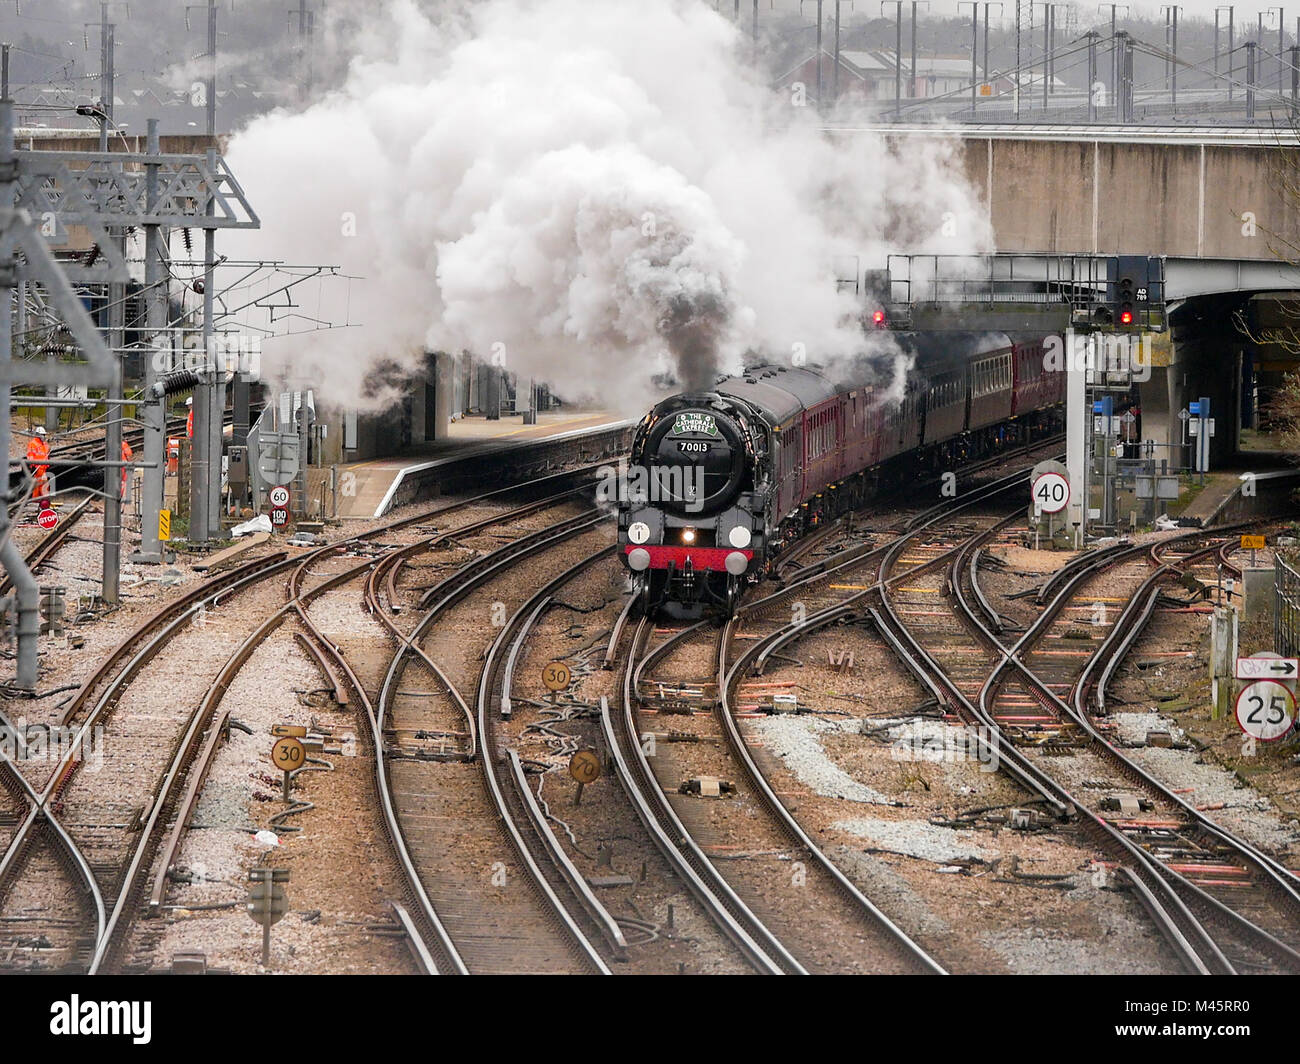 The Cathedrals Express pulled by Oliver Cromwell 70013 locomotive passes through Ashford International Train Station, Kent, UK Stock Photo